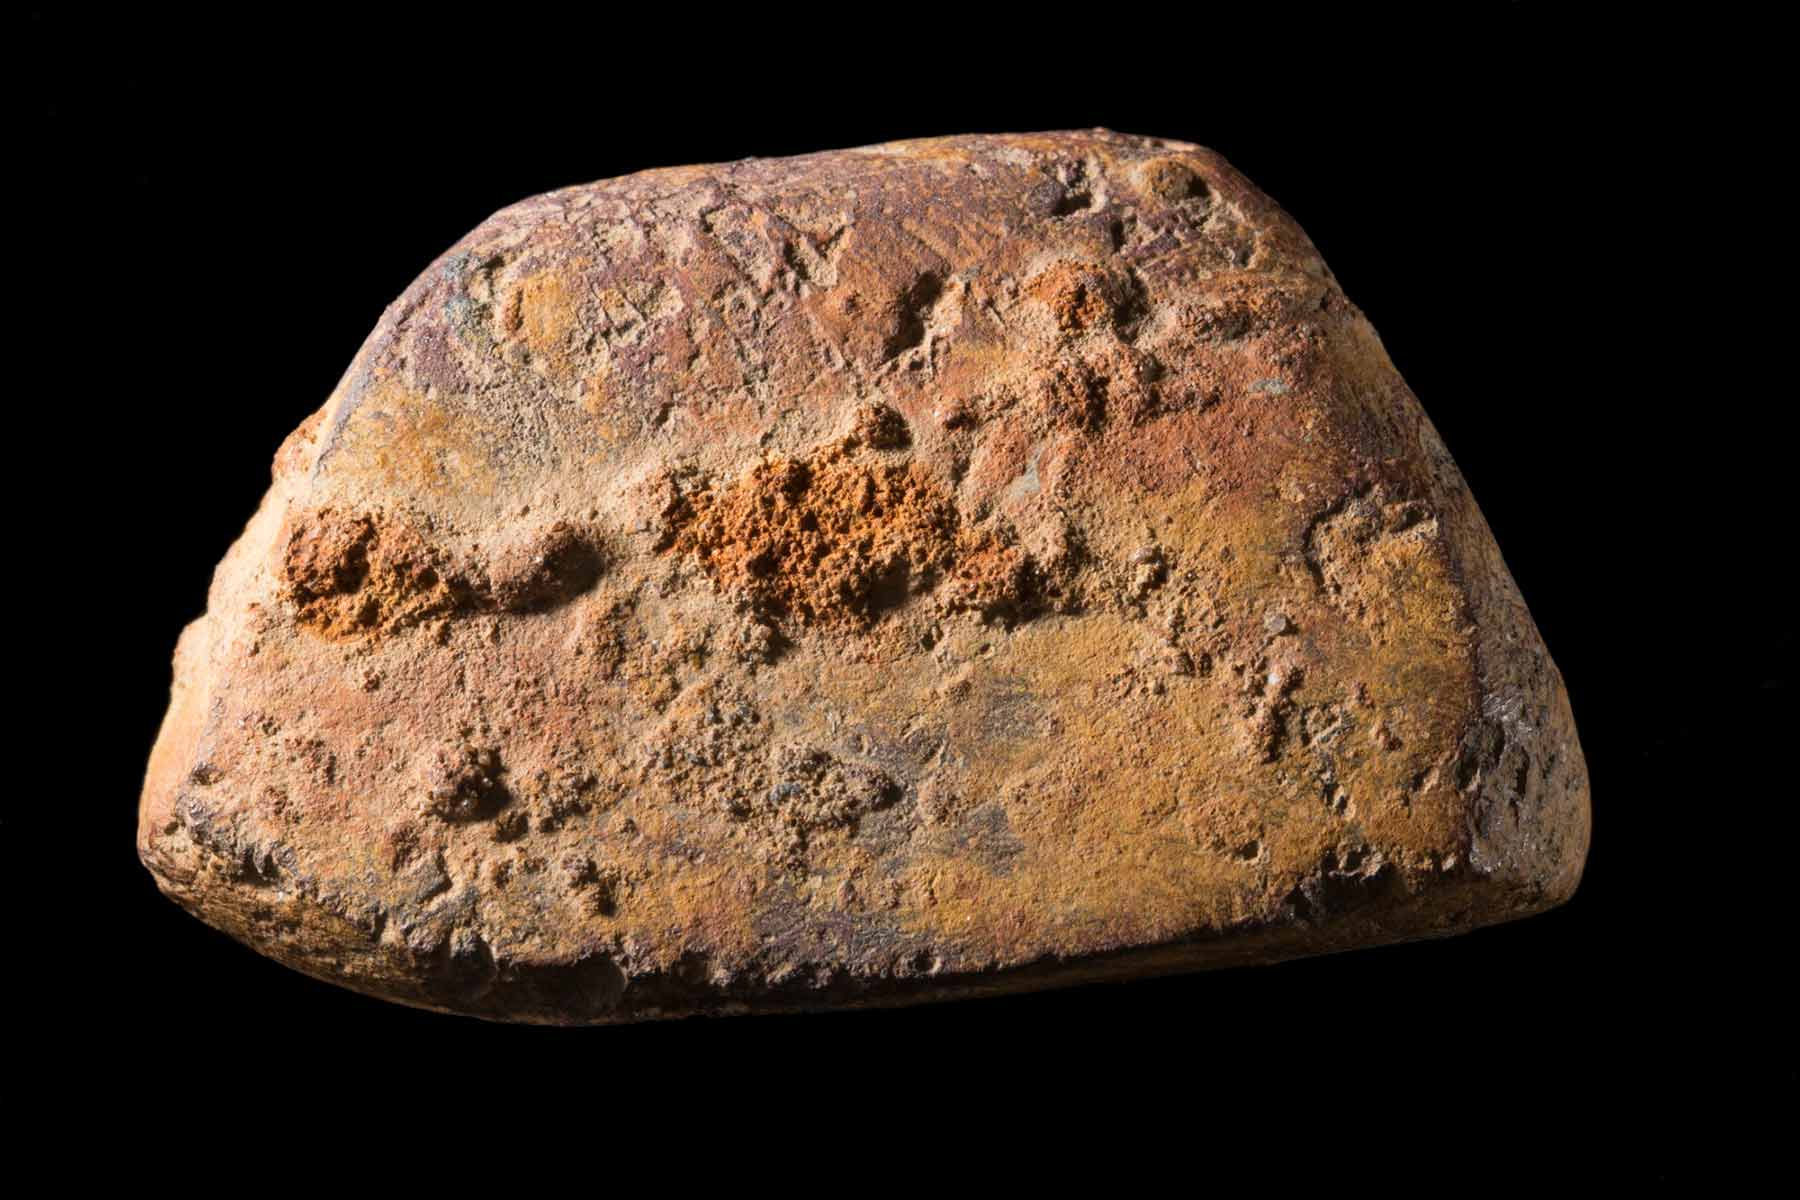 <p>Piece of ochre used in what is now Kakadu National Park, 53,000–59,000 years ago.</p><p><sub>Museum and Gallery of the Northern Territory.</sub><br><sub>Reproduced with permission of Gundjeihmi Aboriginal Corporation (GAC)</sub></p>